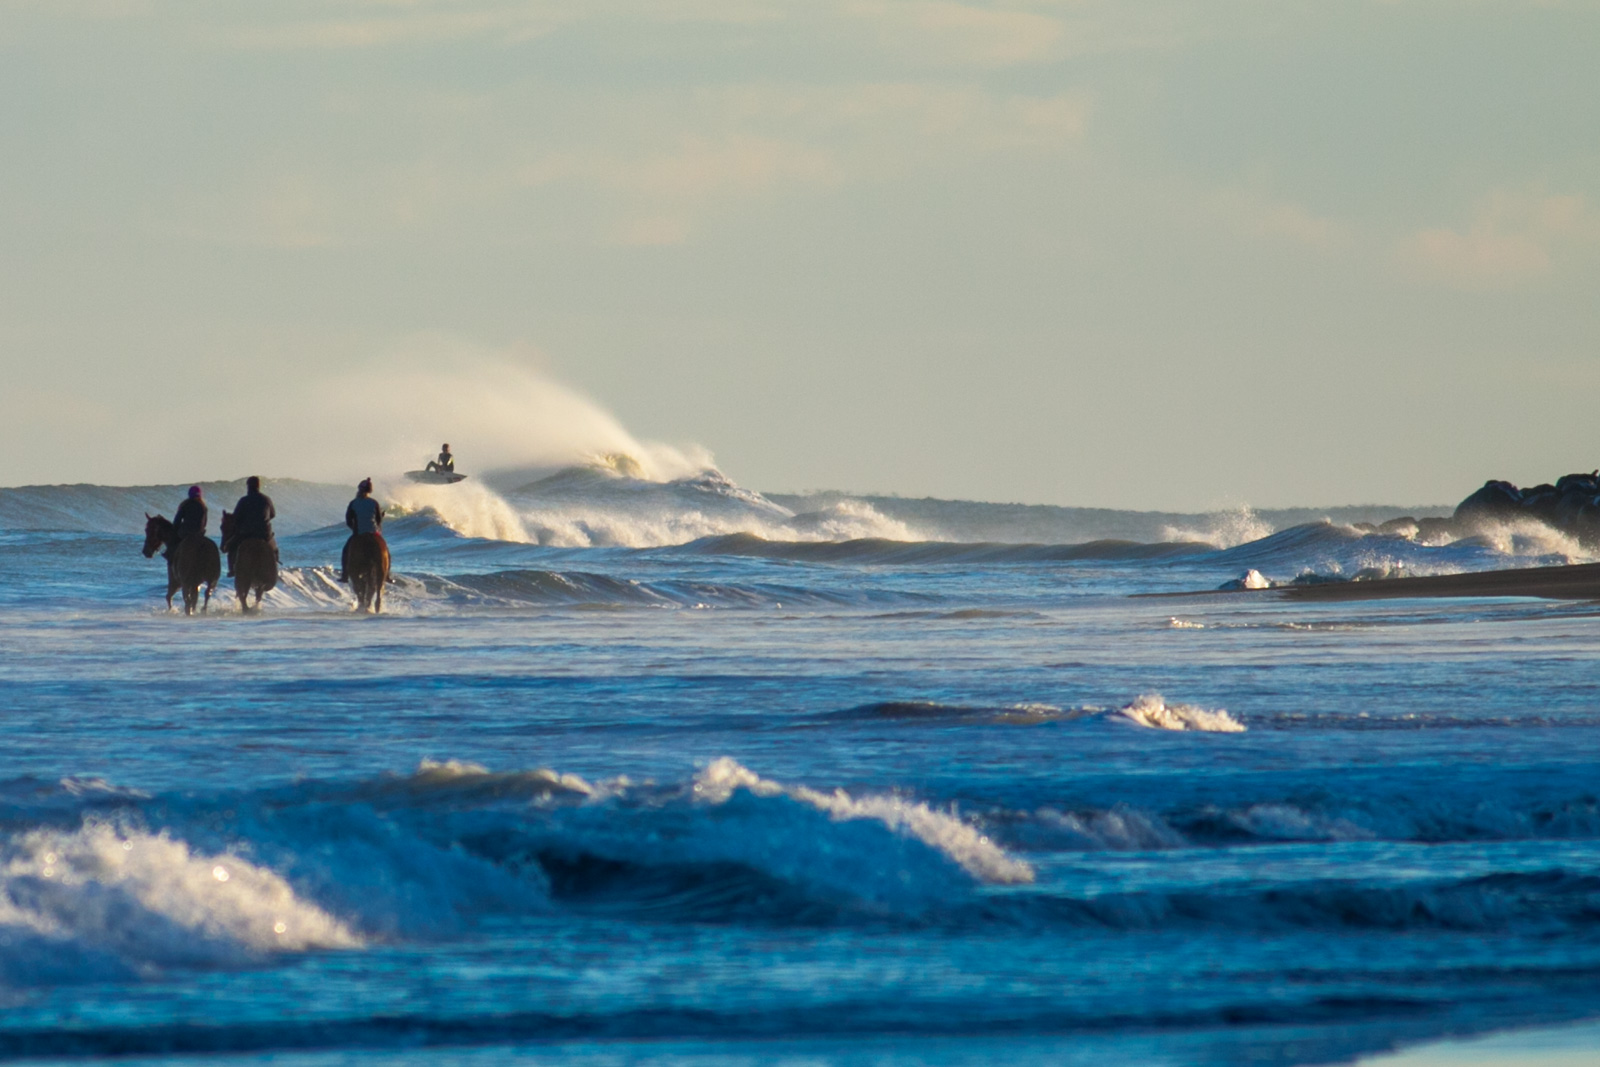 Travel the Taranaki surf highway for surfing and family friendly beaches.